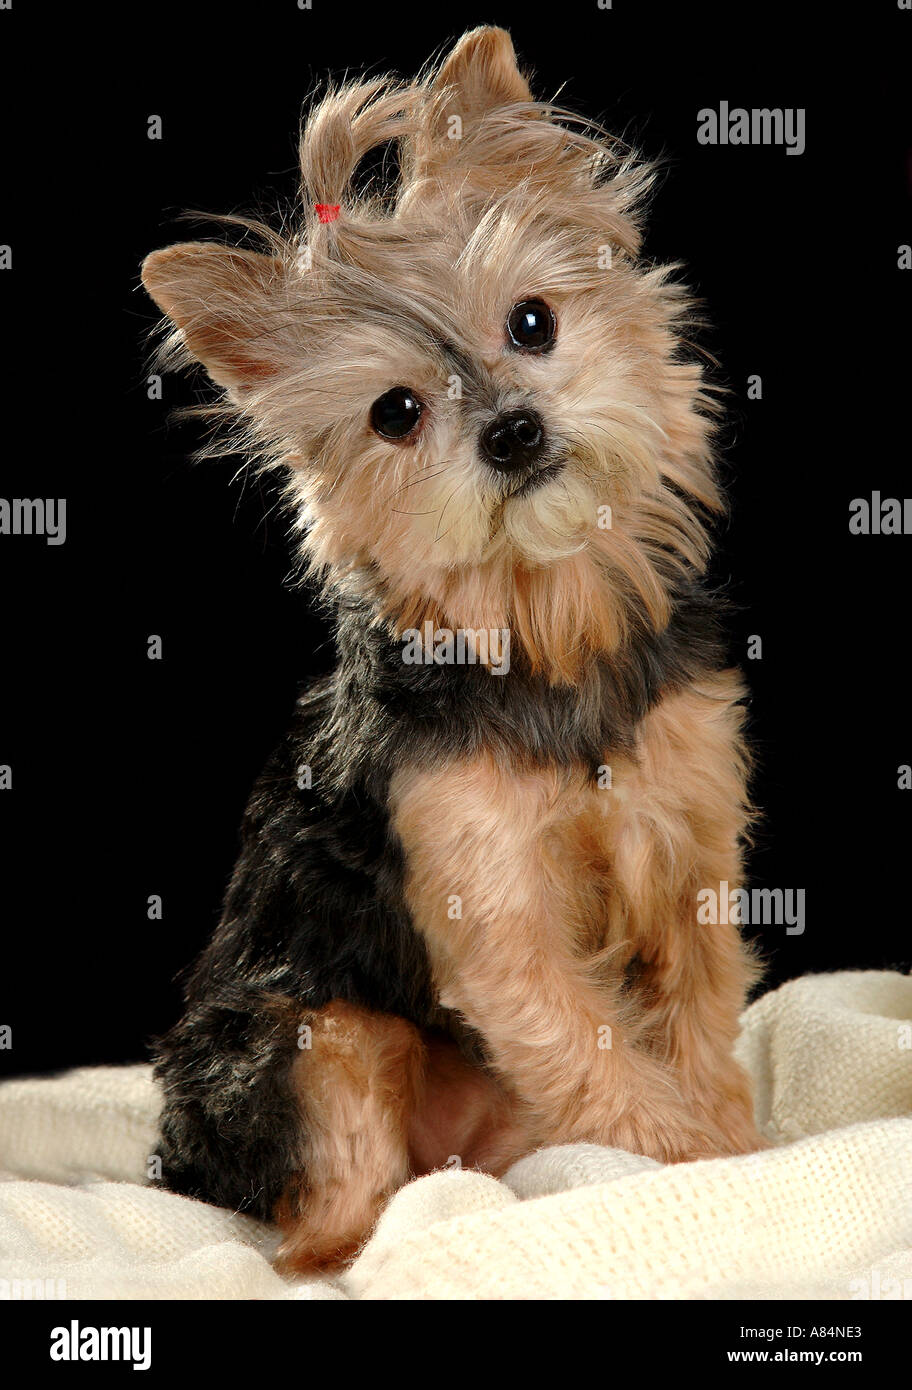 Daisy, the cutest dog around,  strikes her poses for the camera with personality. Stock Photo